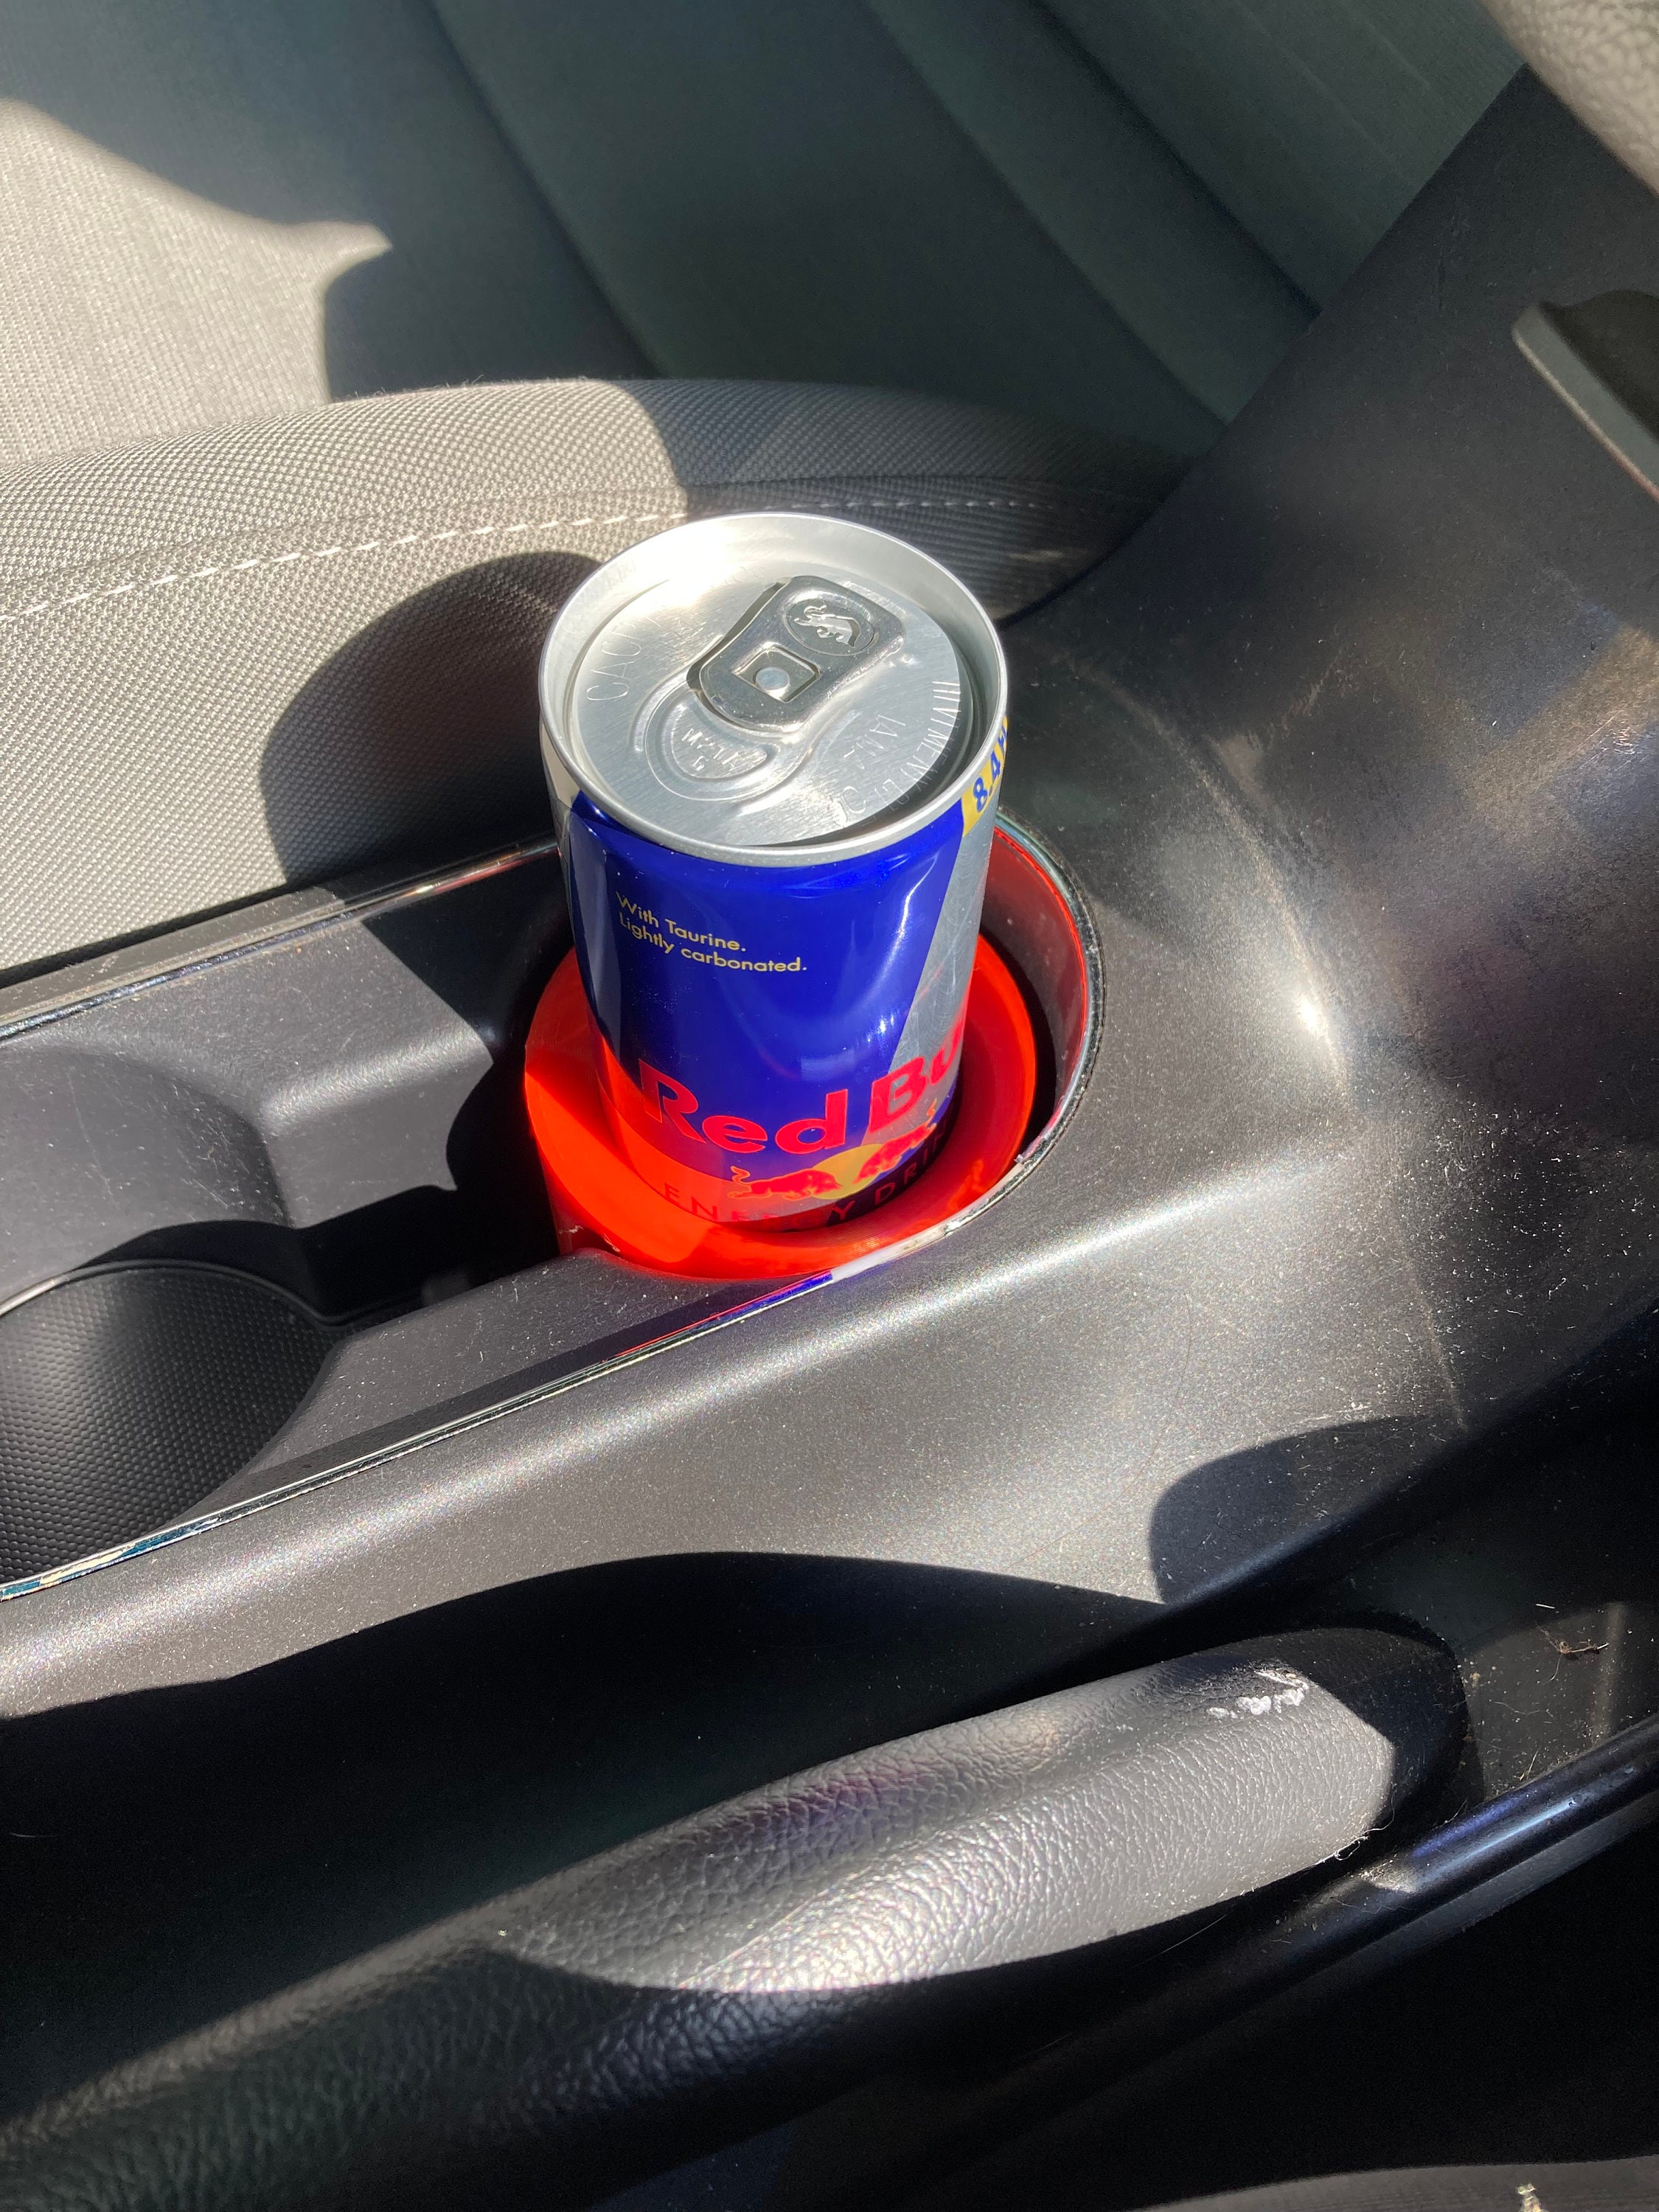 Slim Can Cup Holder Fits Redbull and Many More Multiple Colors to